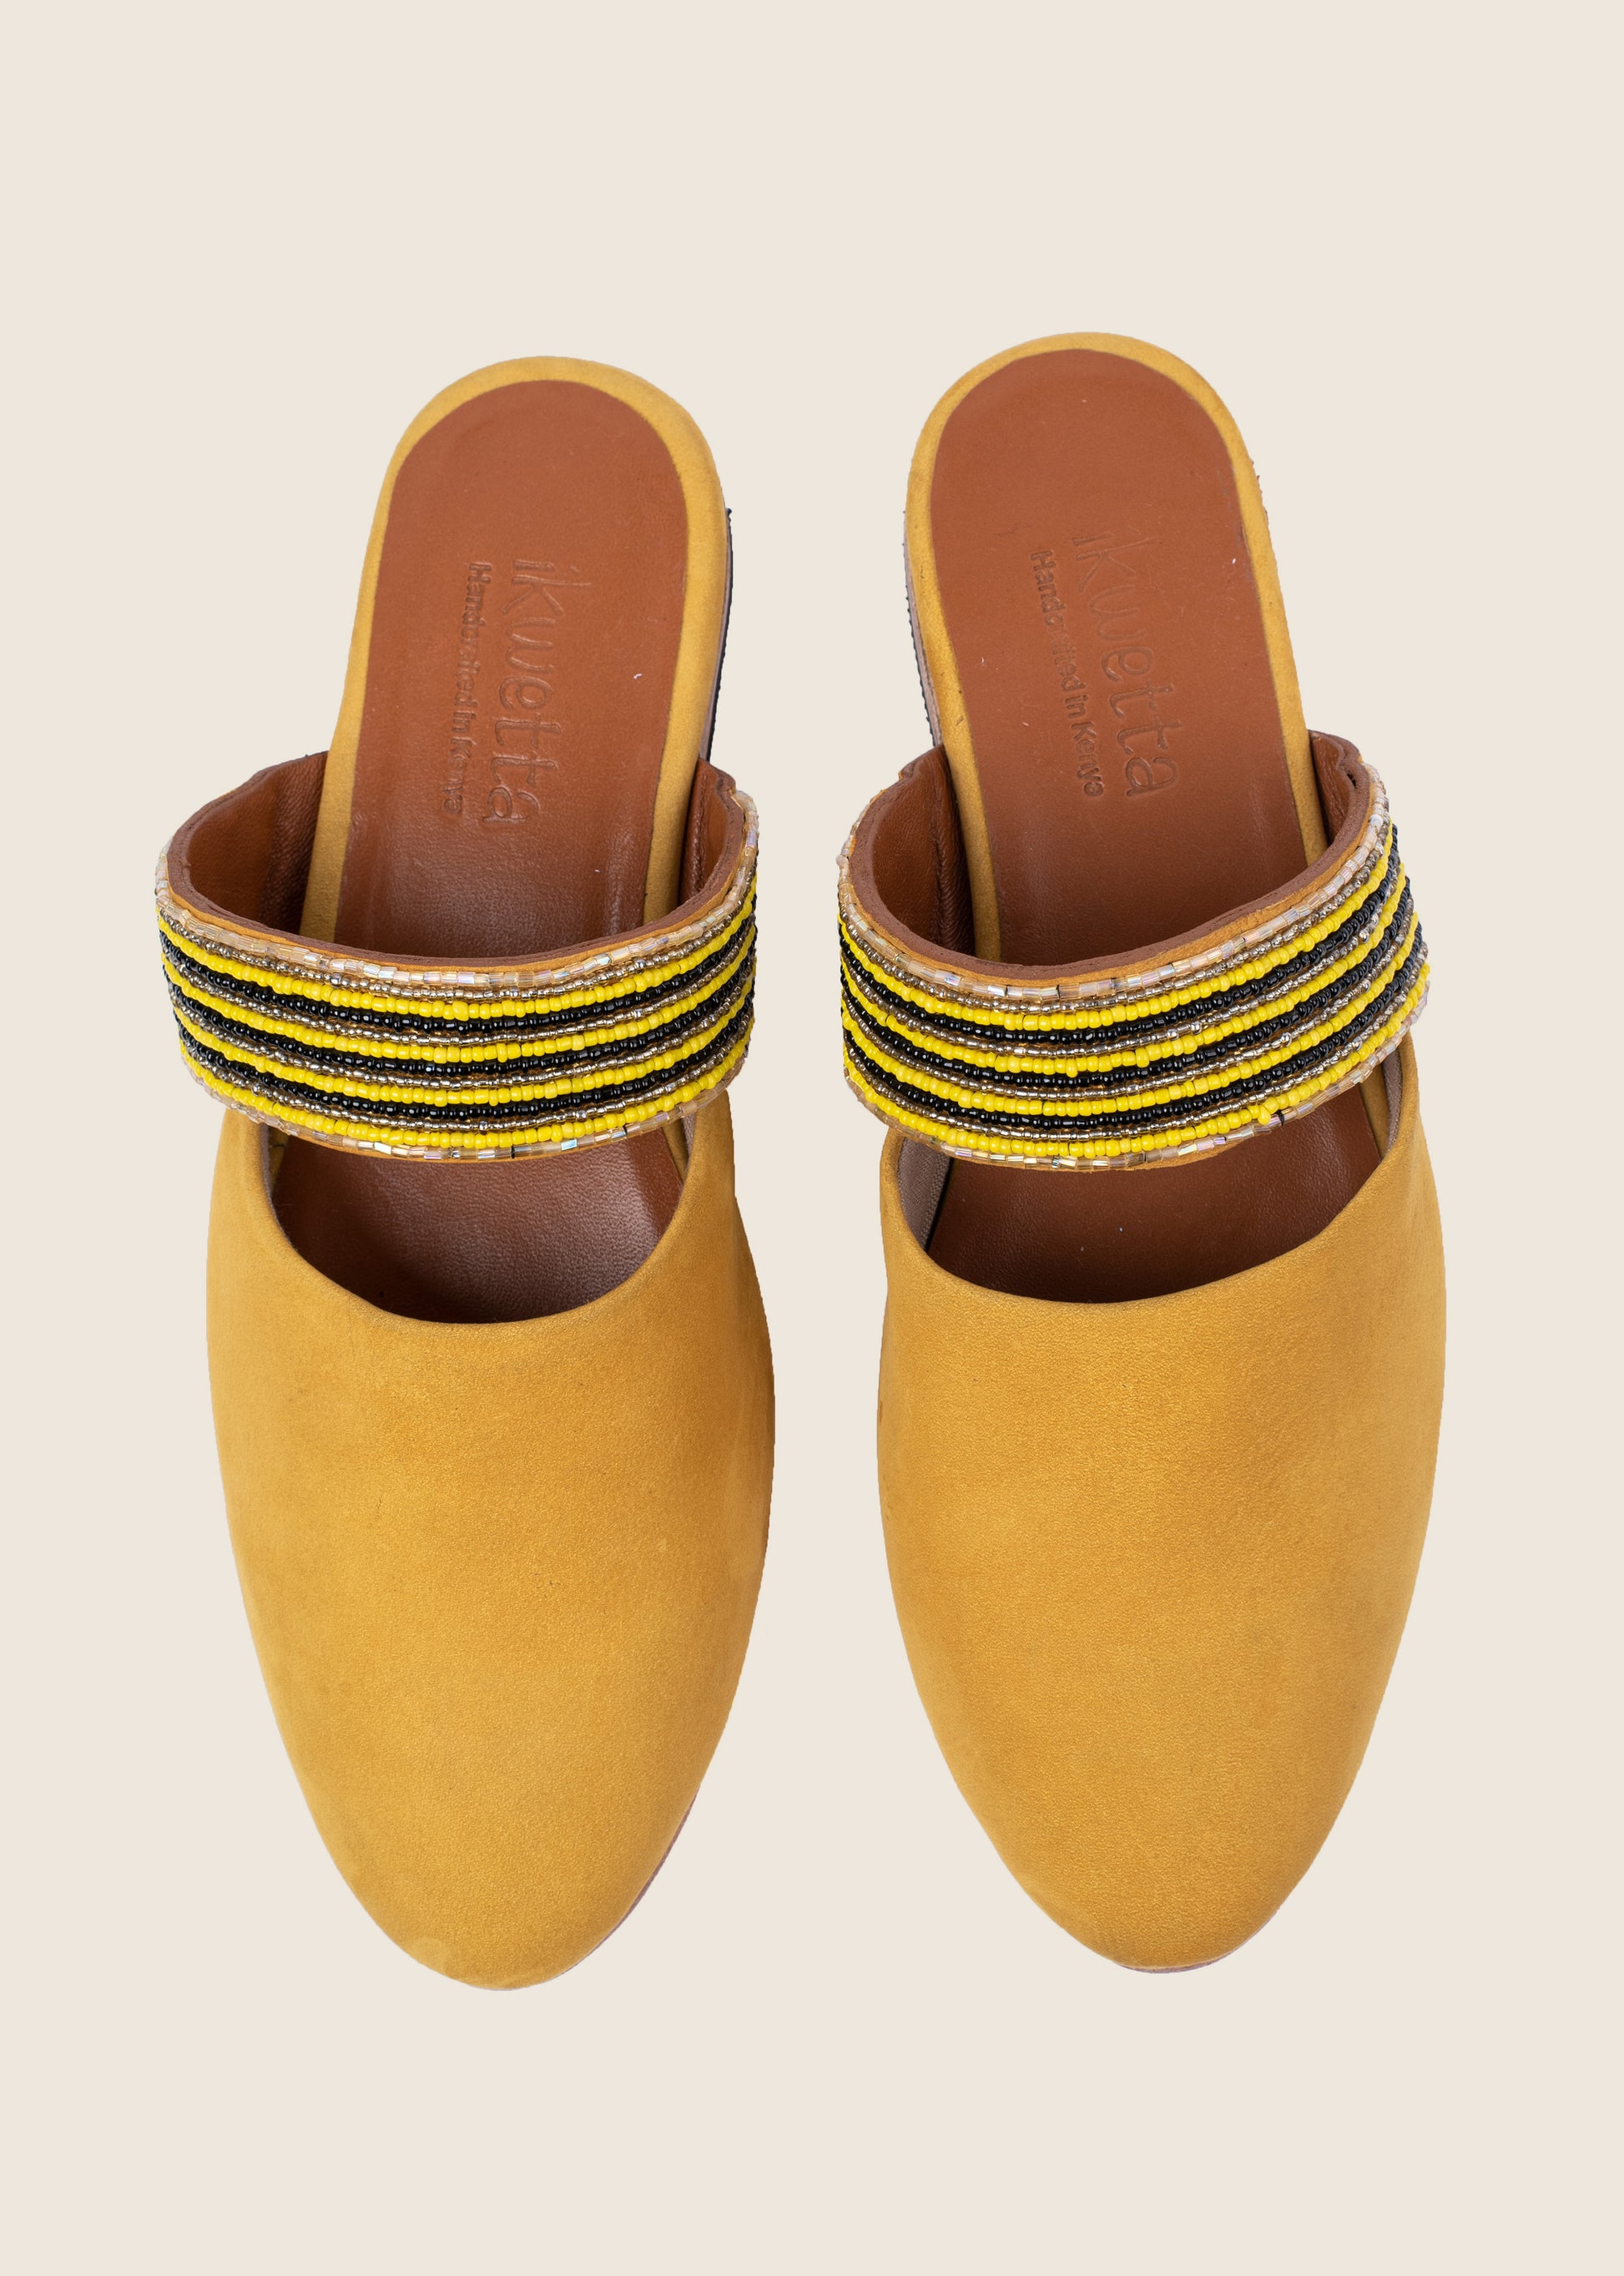 Beaded suede yellow mule with leather sole